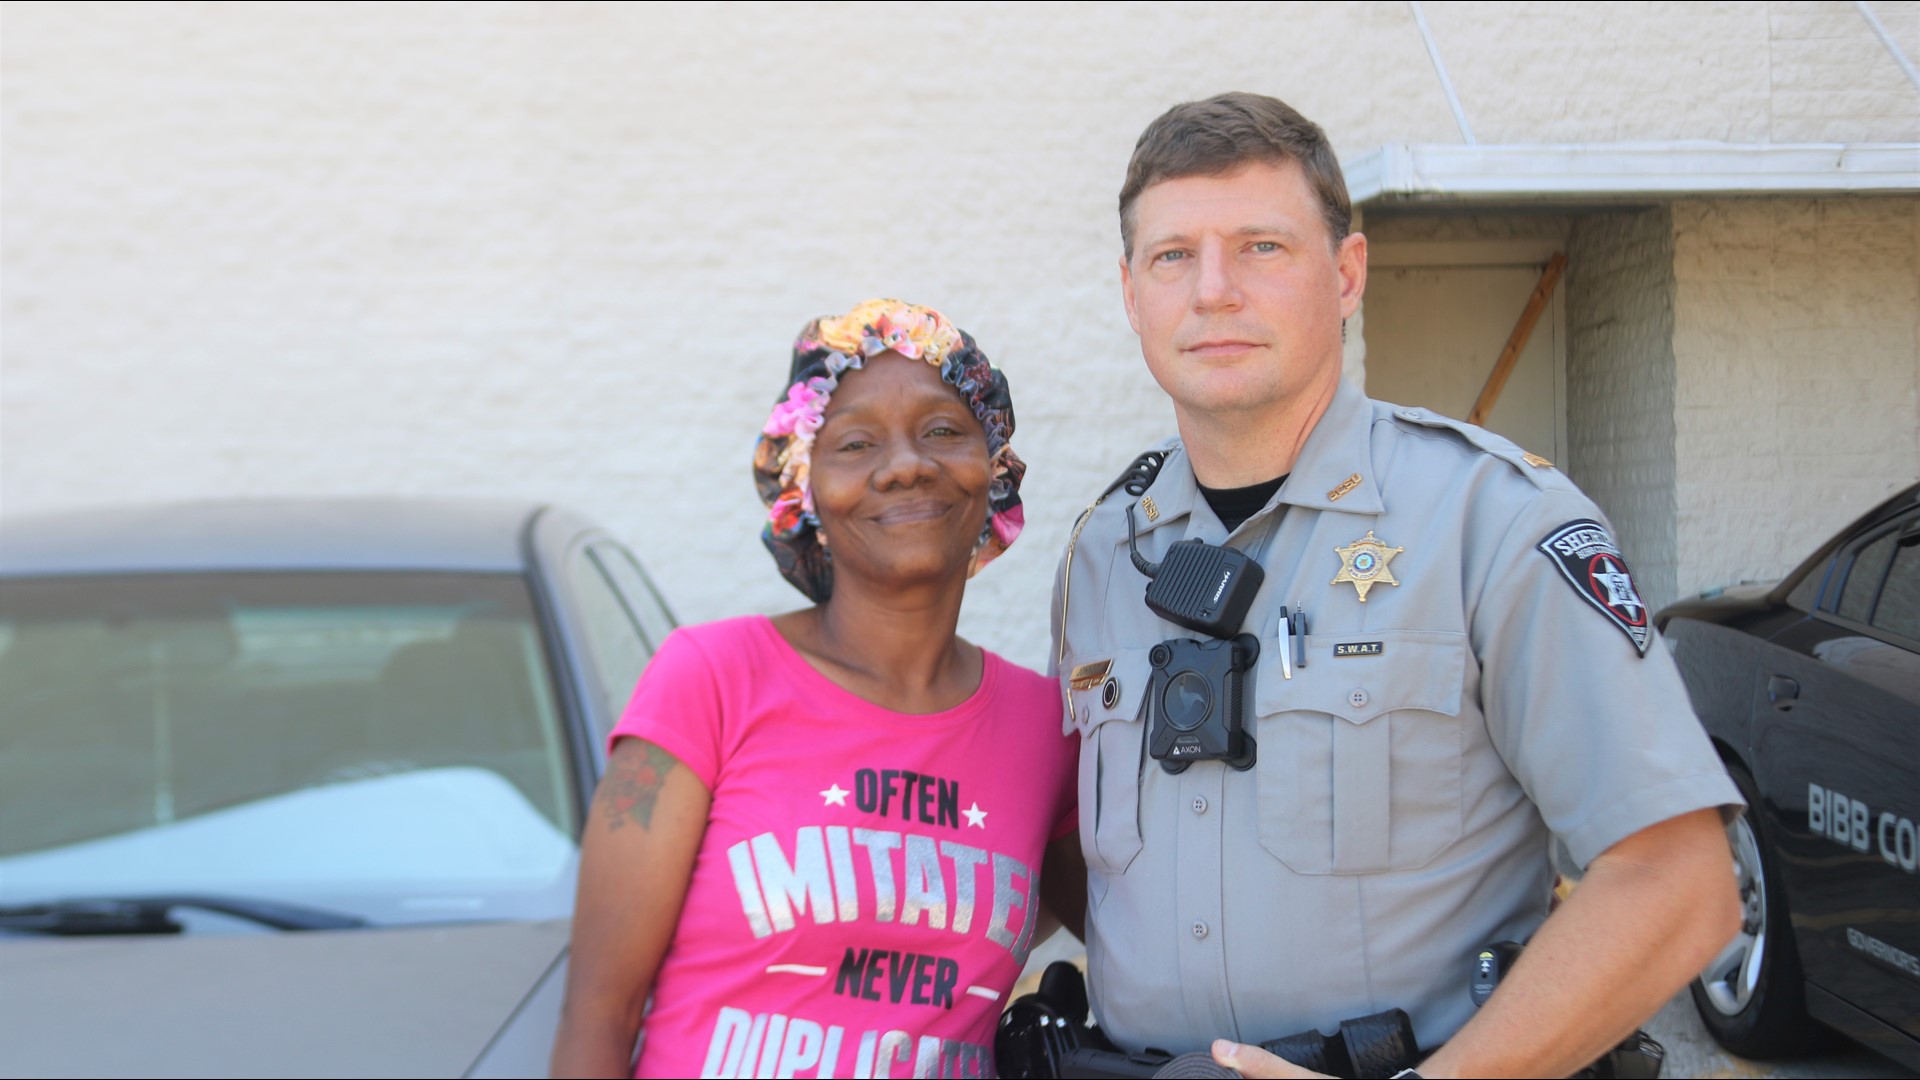 Sergeant Jeffrey Johnson decided to fix a friend's car on his own time